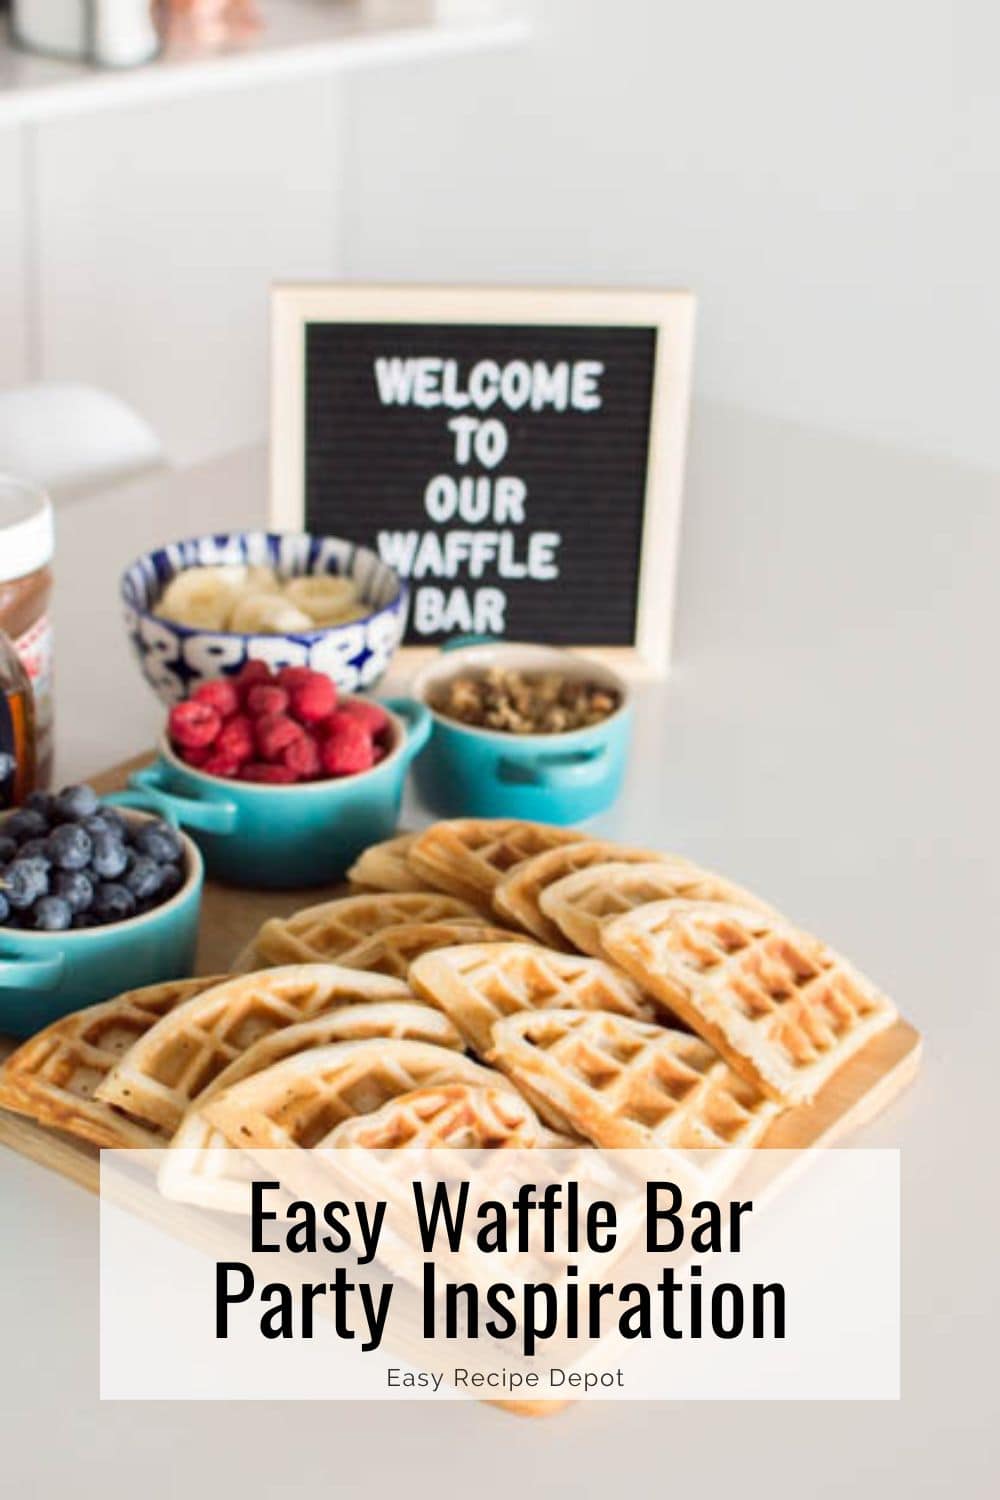 Easy waffle bar party inspiration.